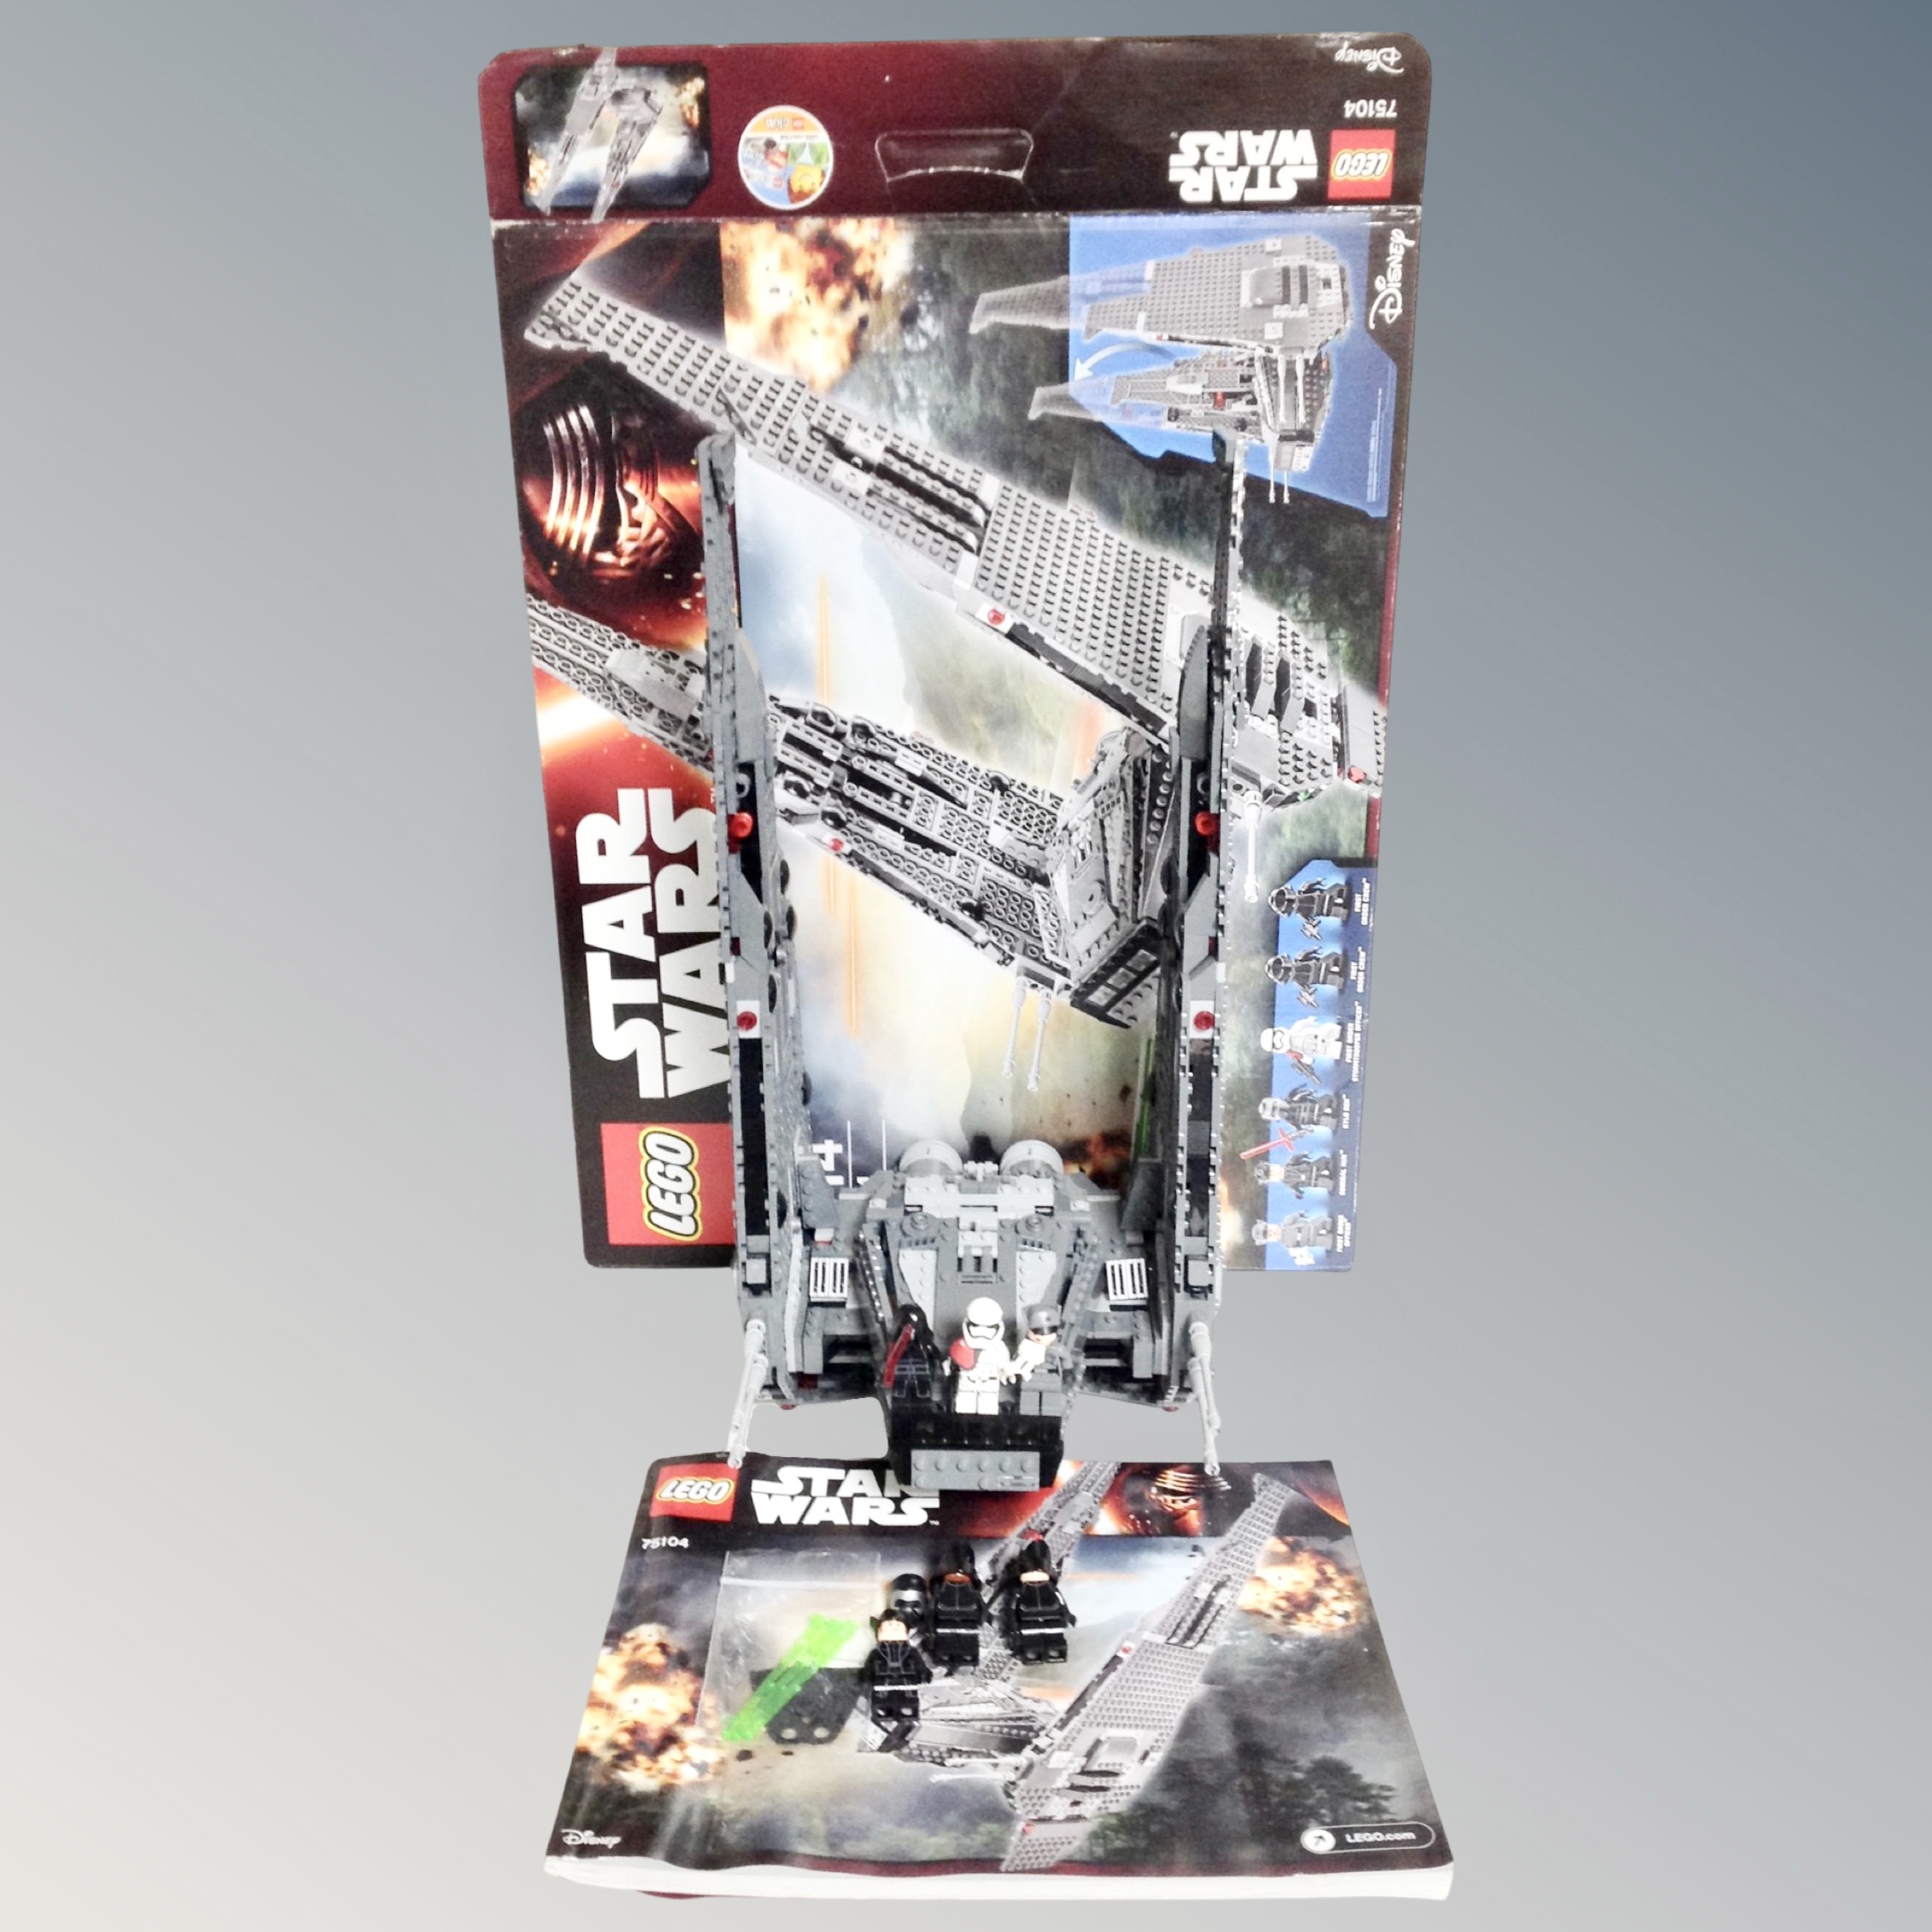 A Lego Star Wars 75104 Kylo Ren's Command Shuttle, with box and instructions.